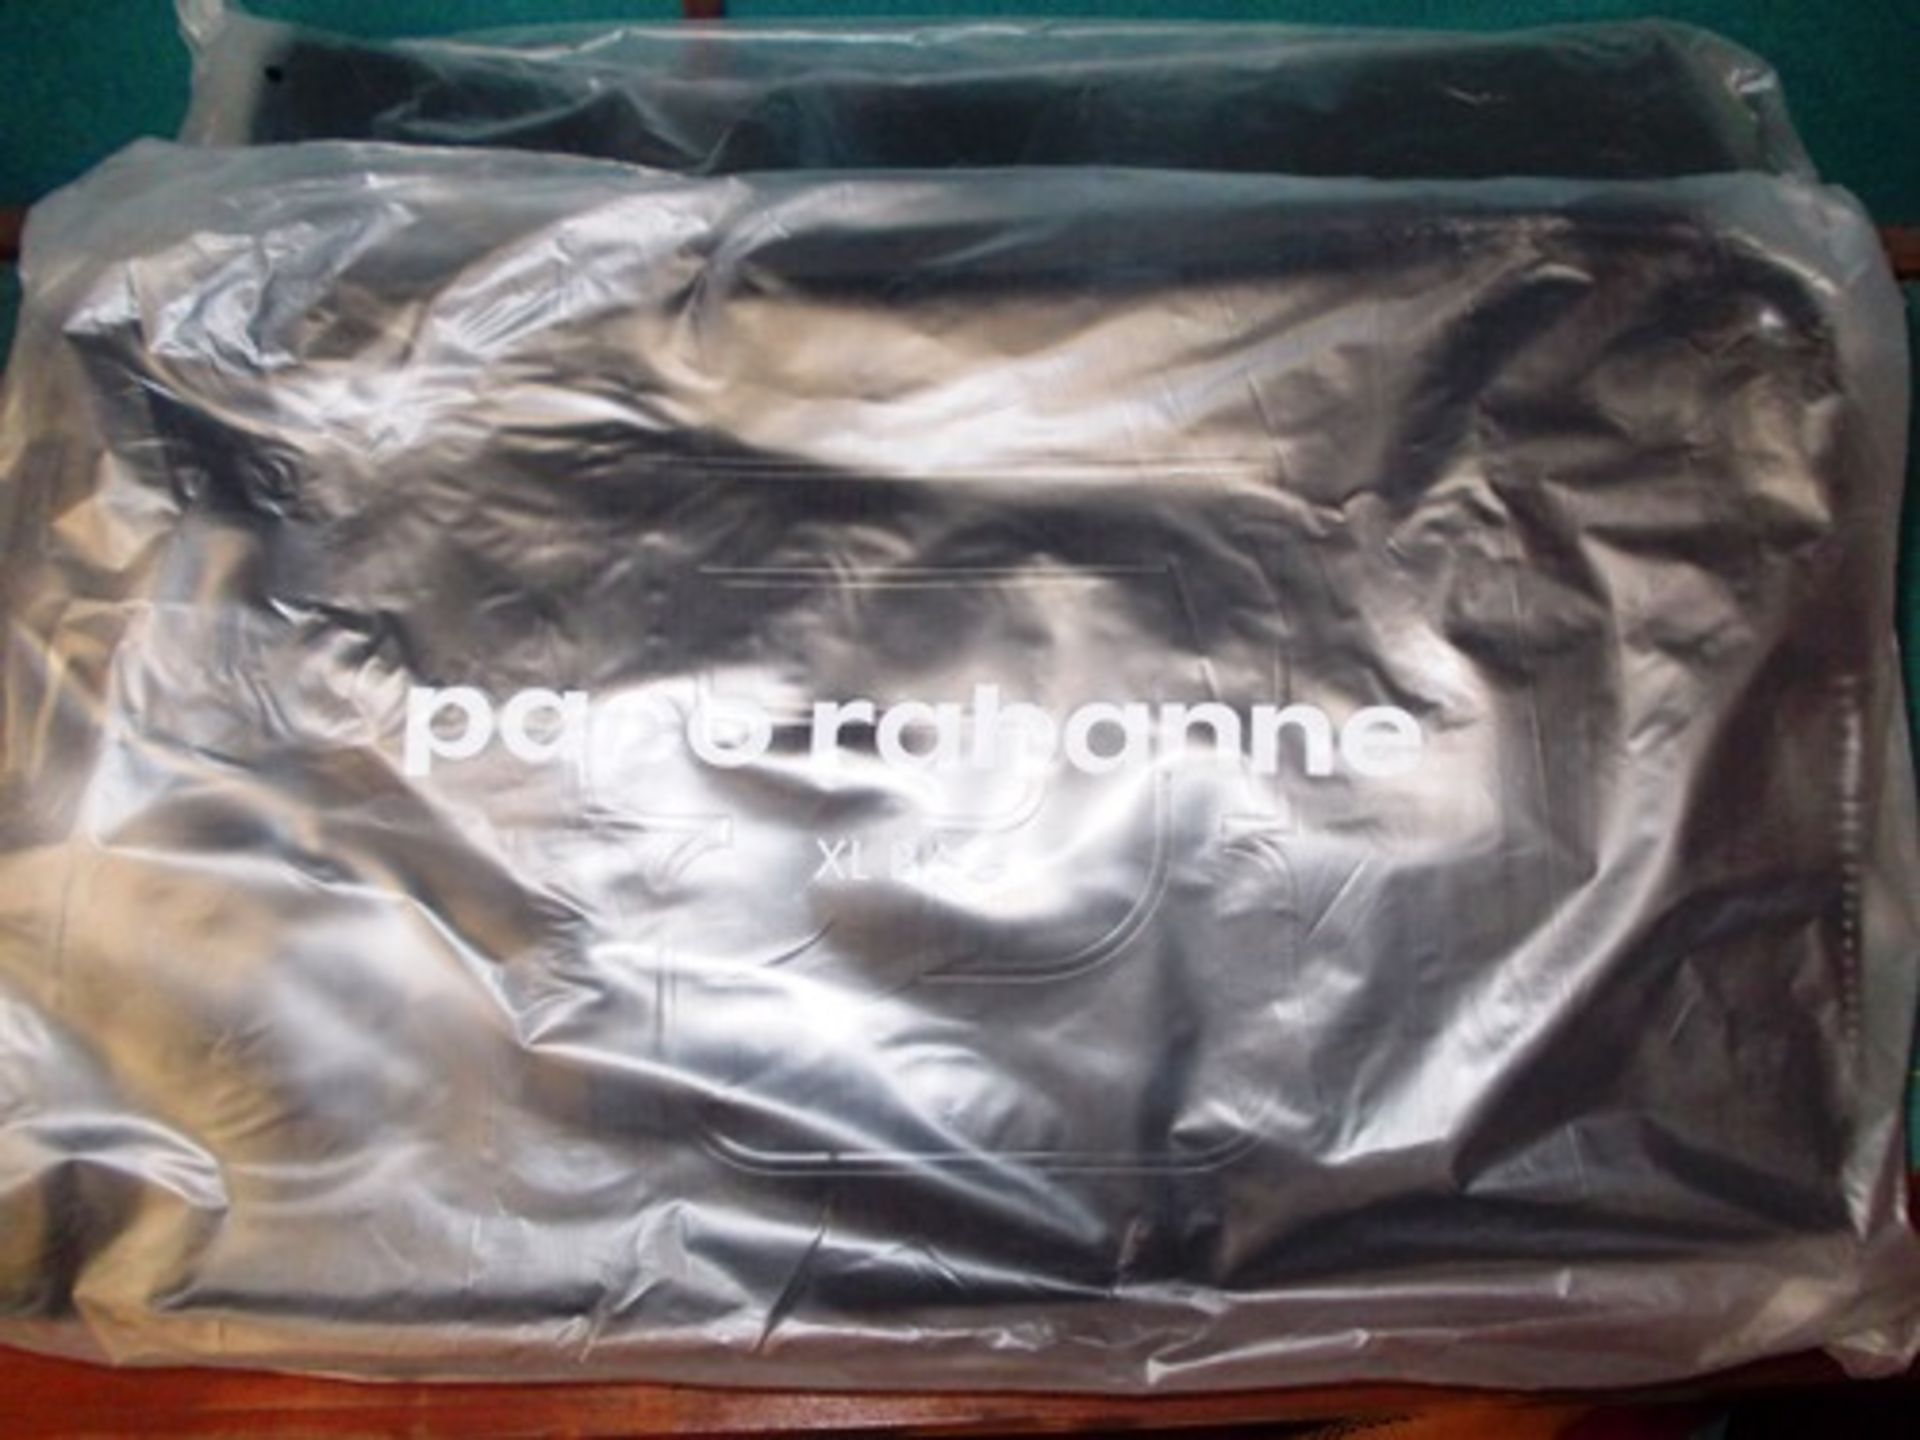 3 x Paco Rabanne XL holdall bags - Sealed new in pack (C11B)